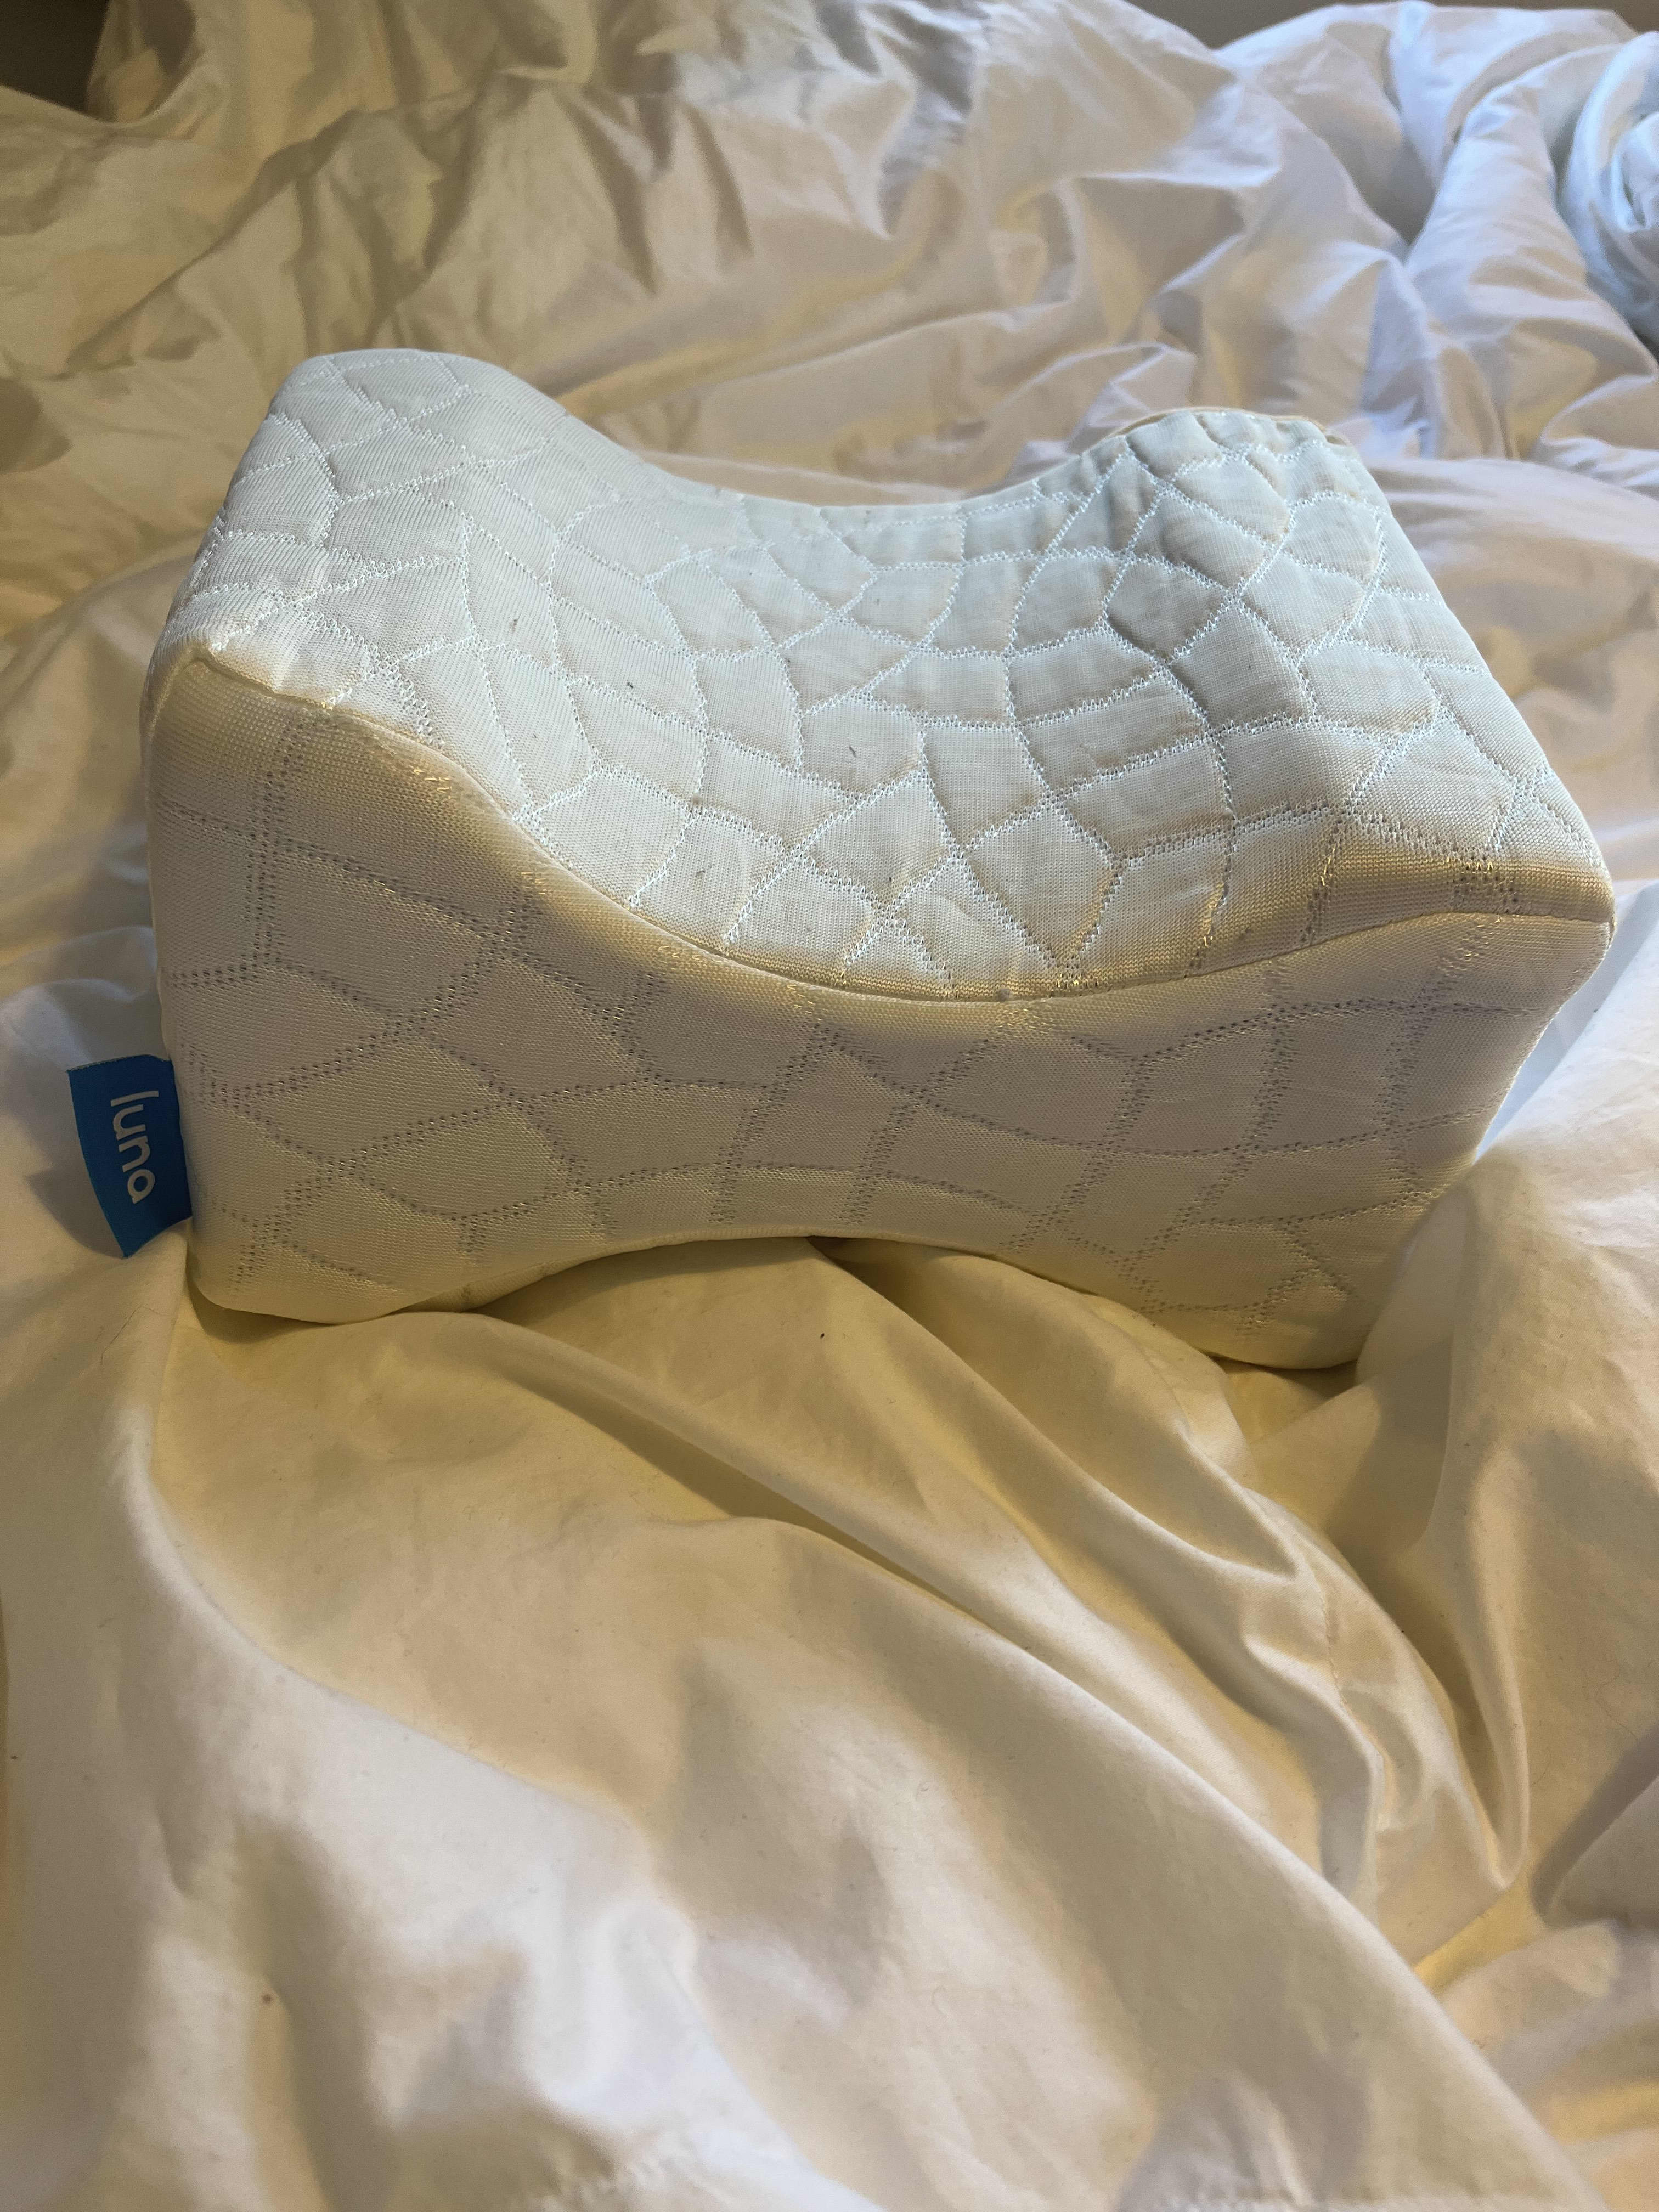 A Review of Luna's Orthopedic Knee Pillow